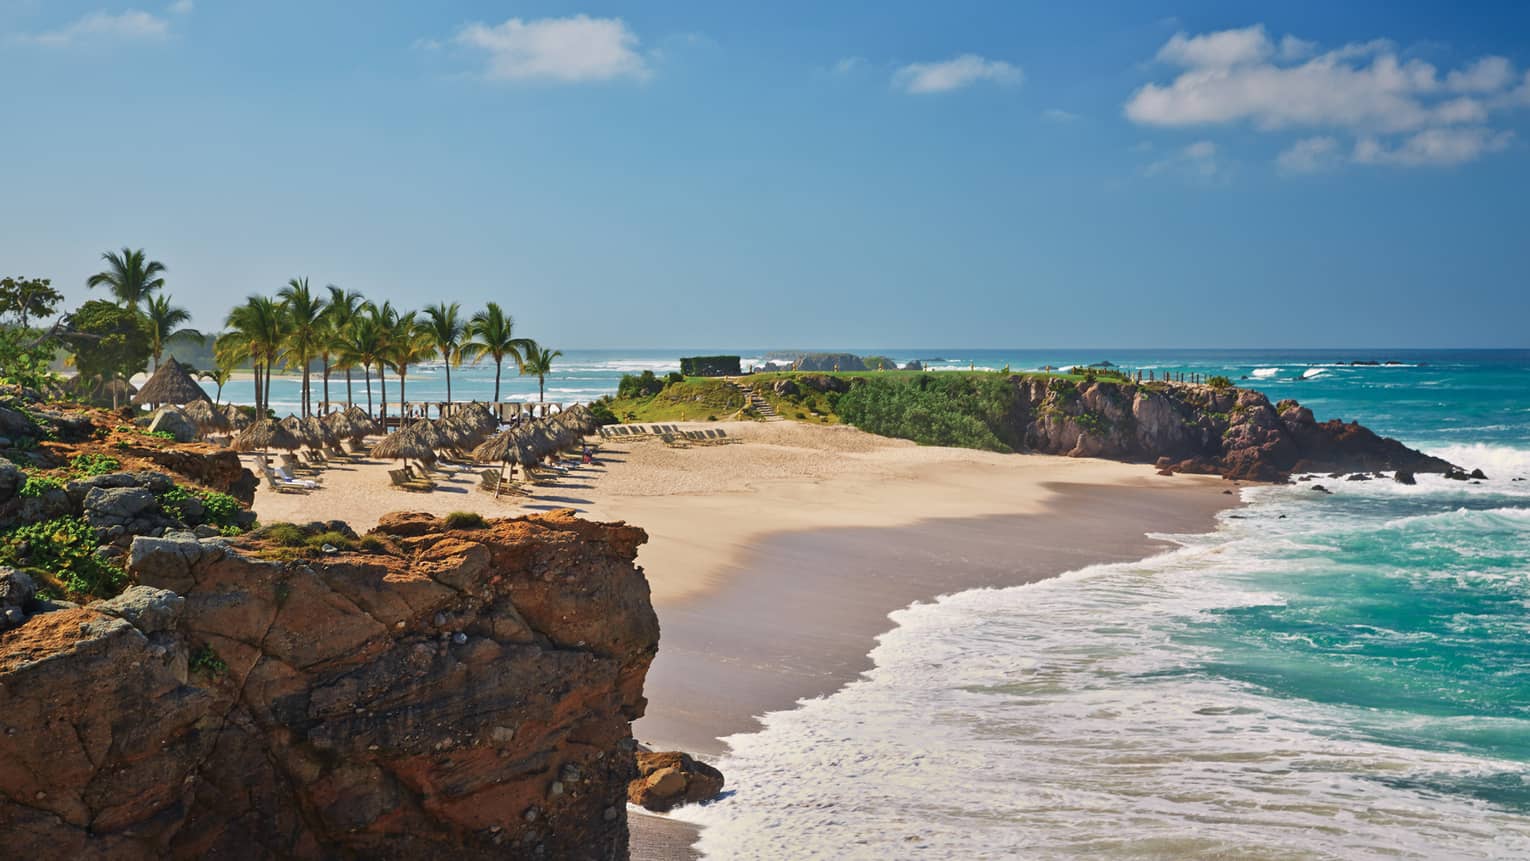 White sand beach lined with lounge chairs, palms, turquoise tides from oceanside cliff